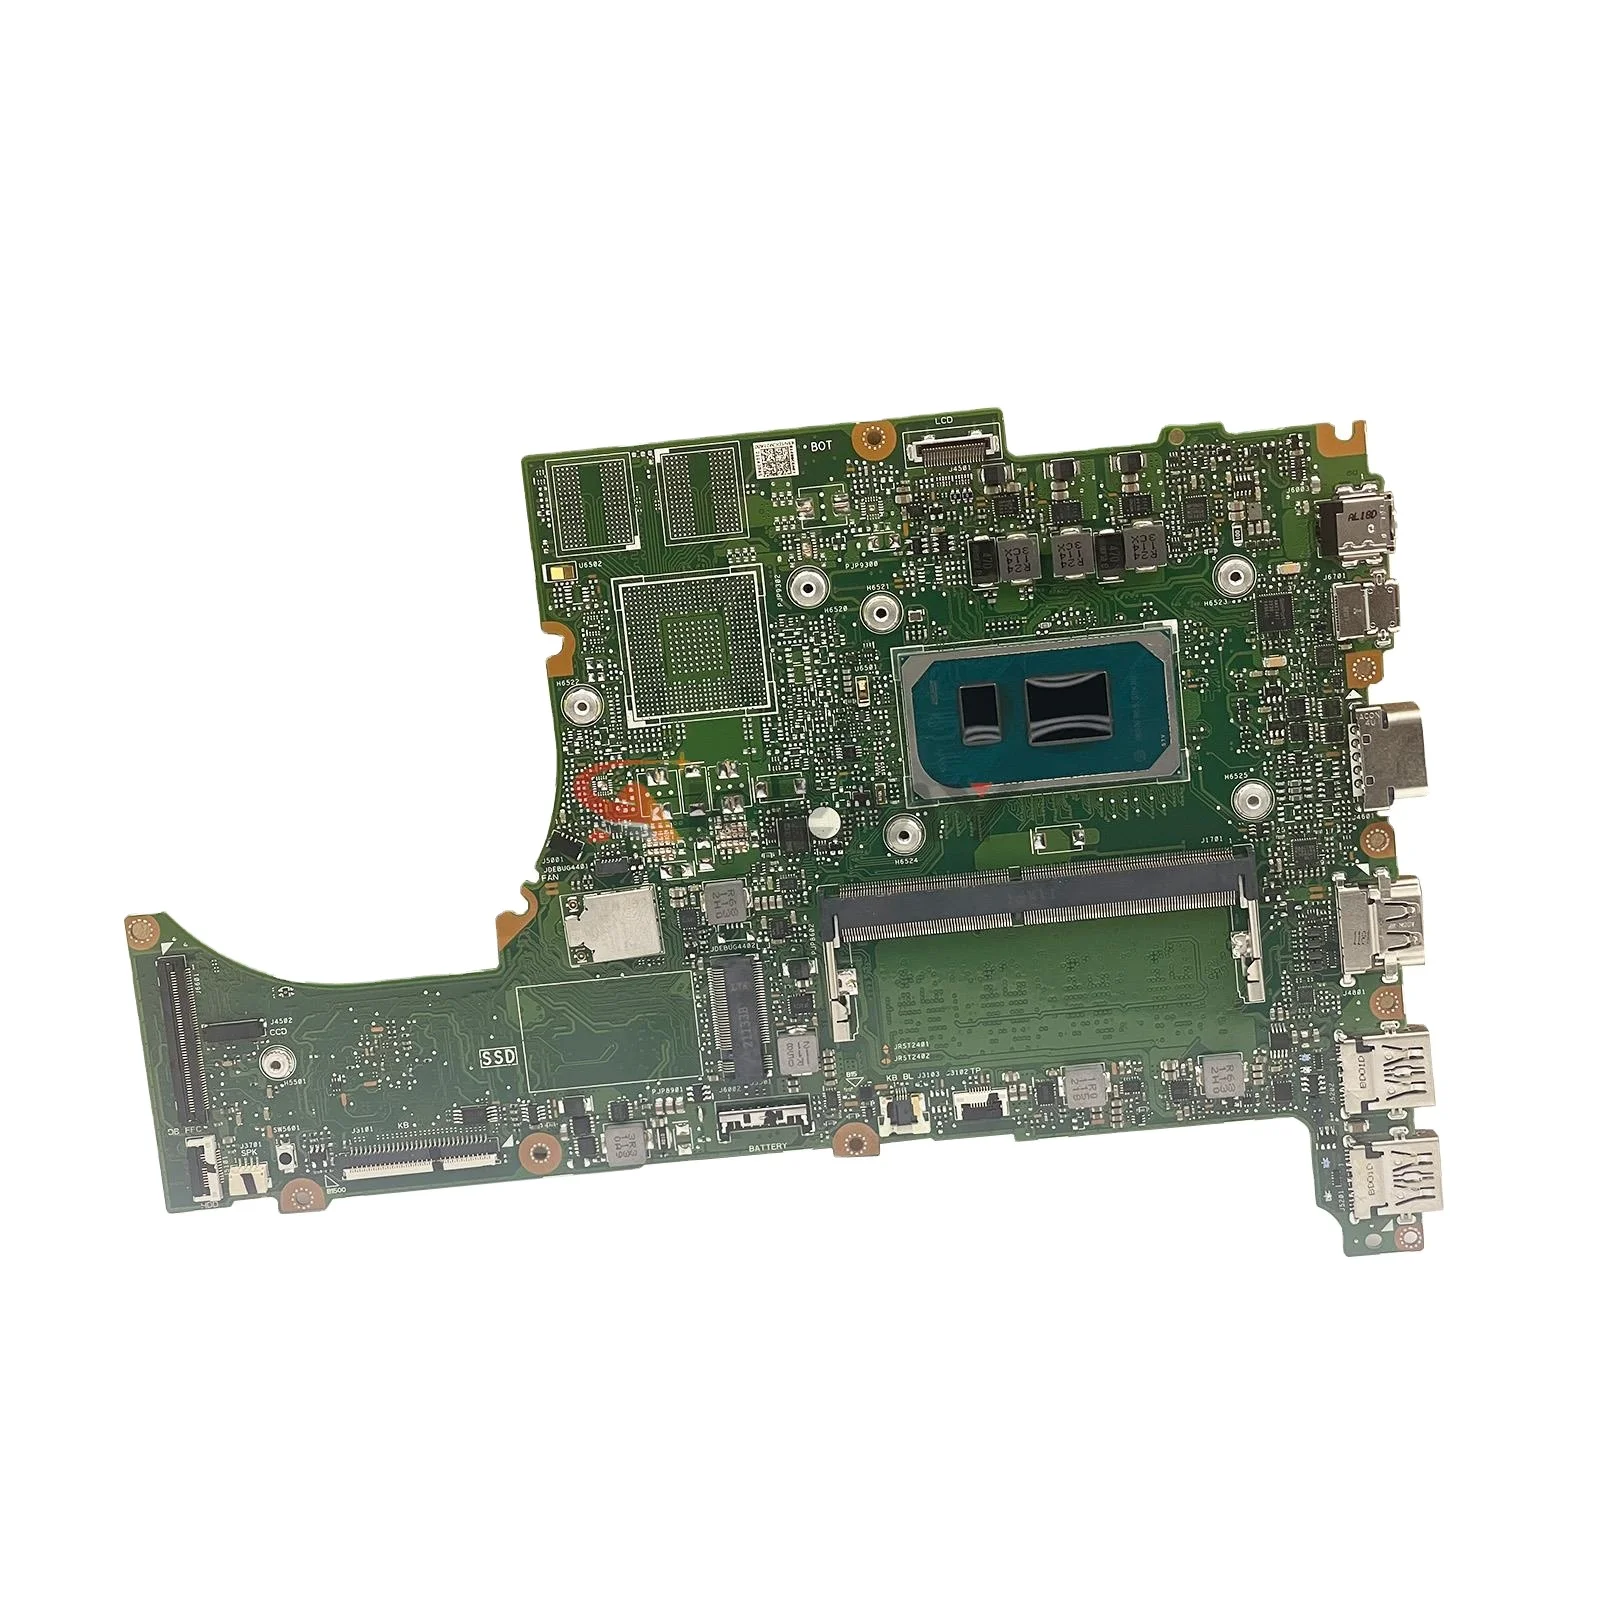 

B1400CEAE B1400CEAEY Mainboard For Asus ExpertBook B1400 B1400CEAE-EB0116R Laptop Motherboard w/ i3 i5 i7 11th Gen 4G 8G 16G RAM